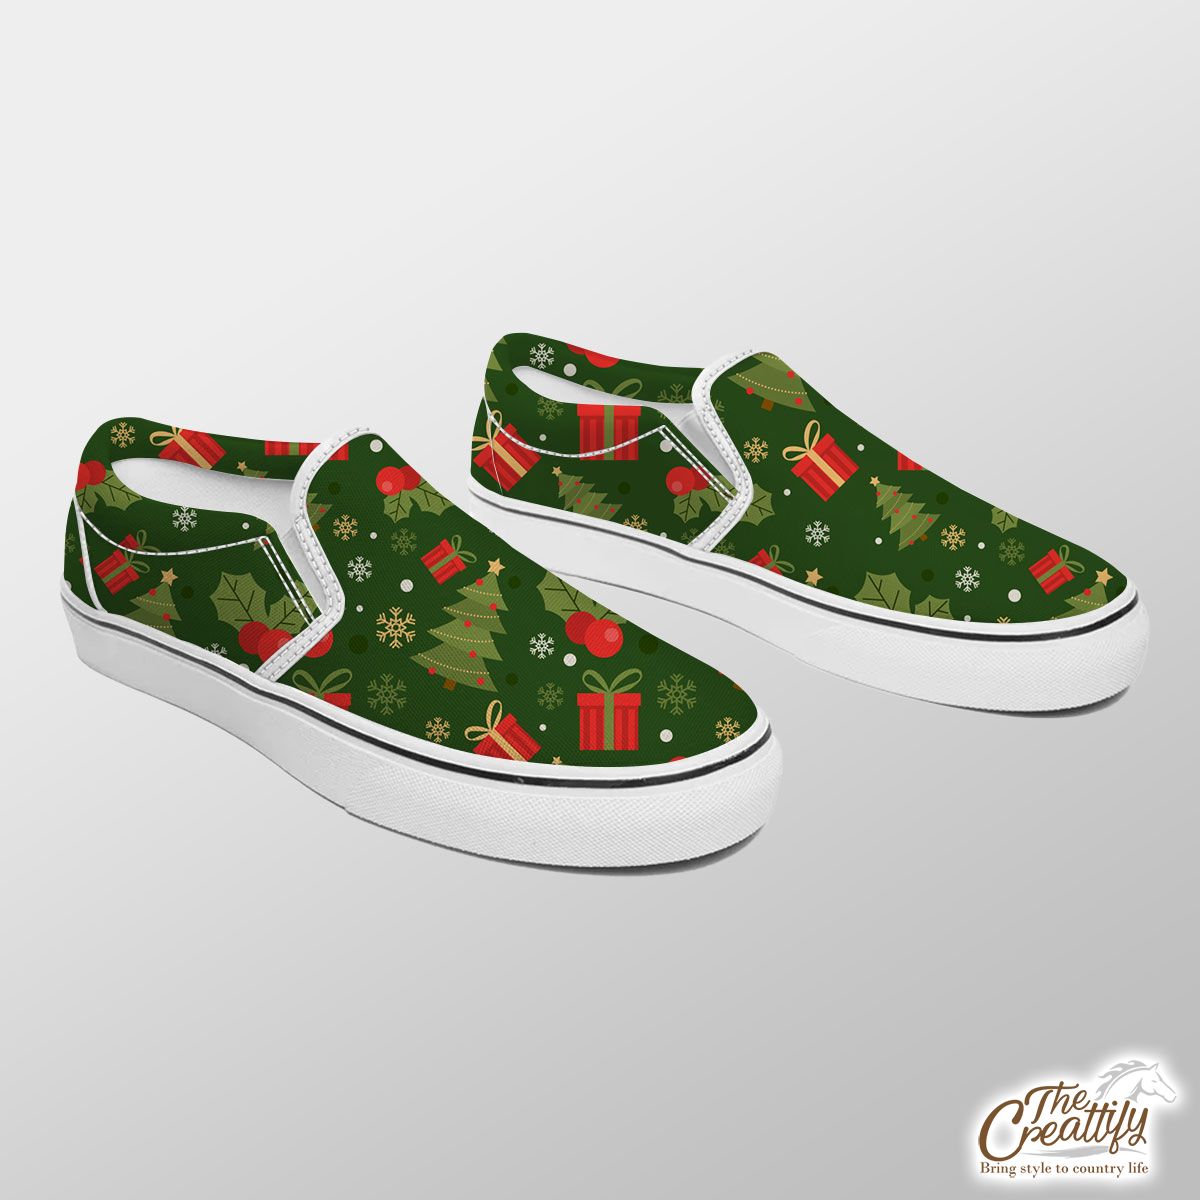 Christmas Tree With Holly Leaf And Presents Slip On Sneakers